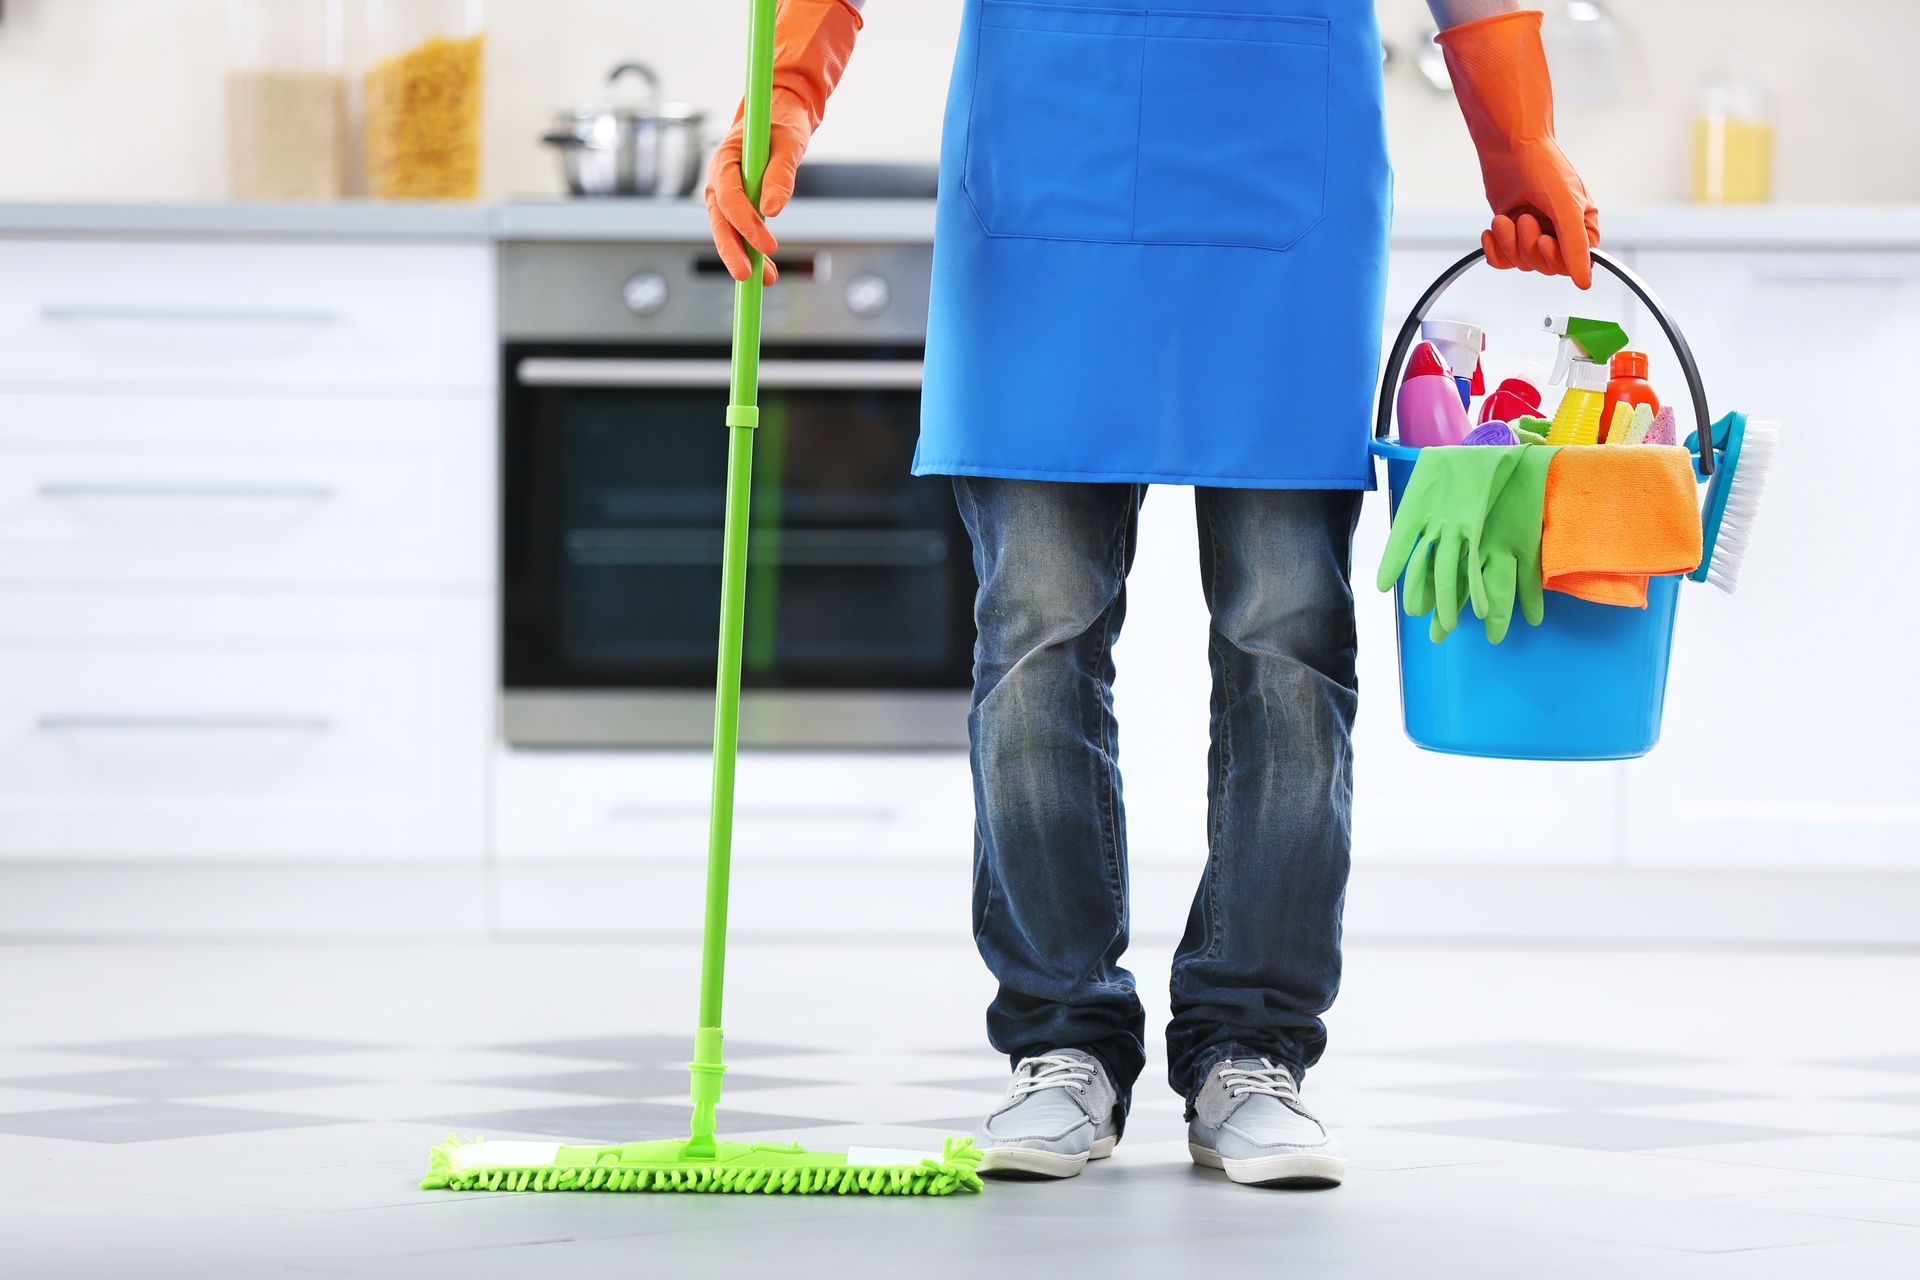 maid holding a mop and a bucket of cleaning products